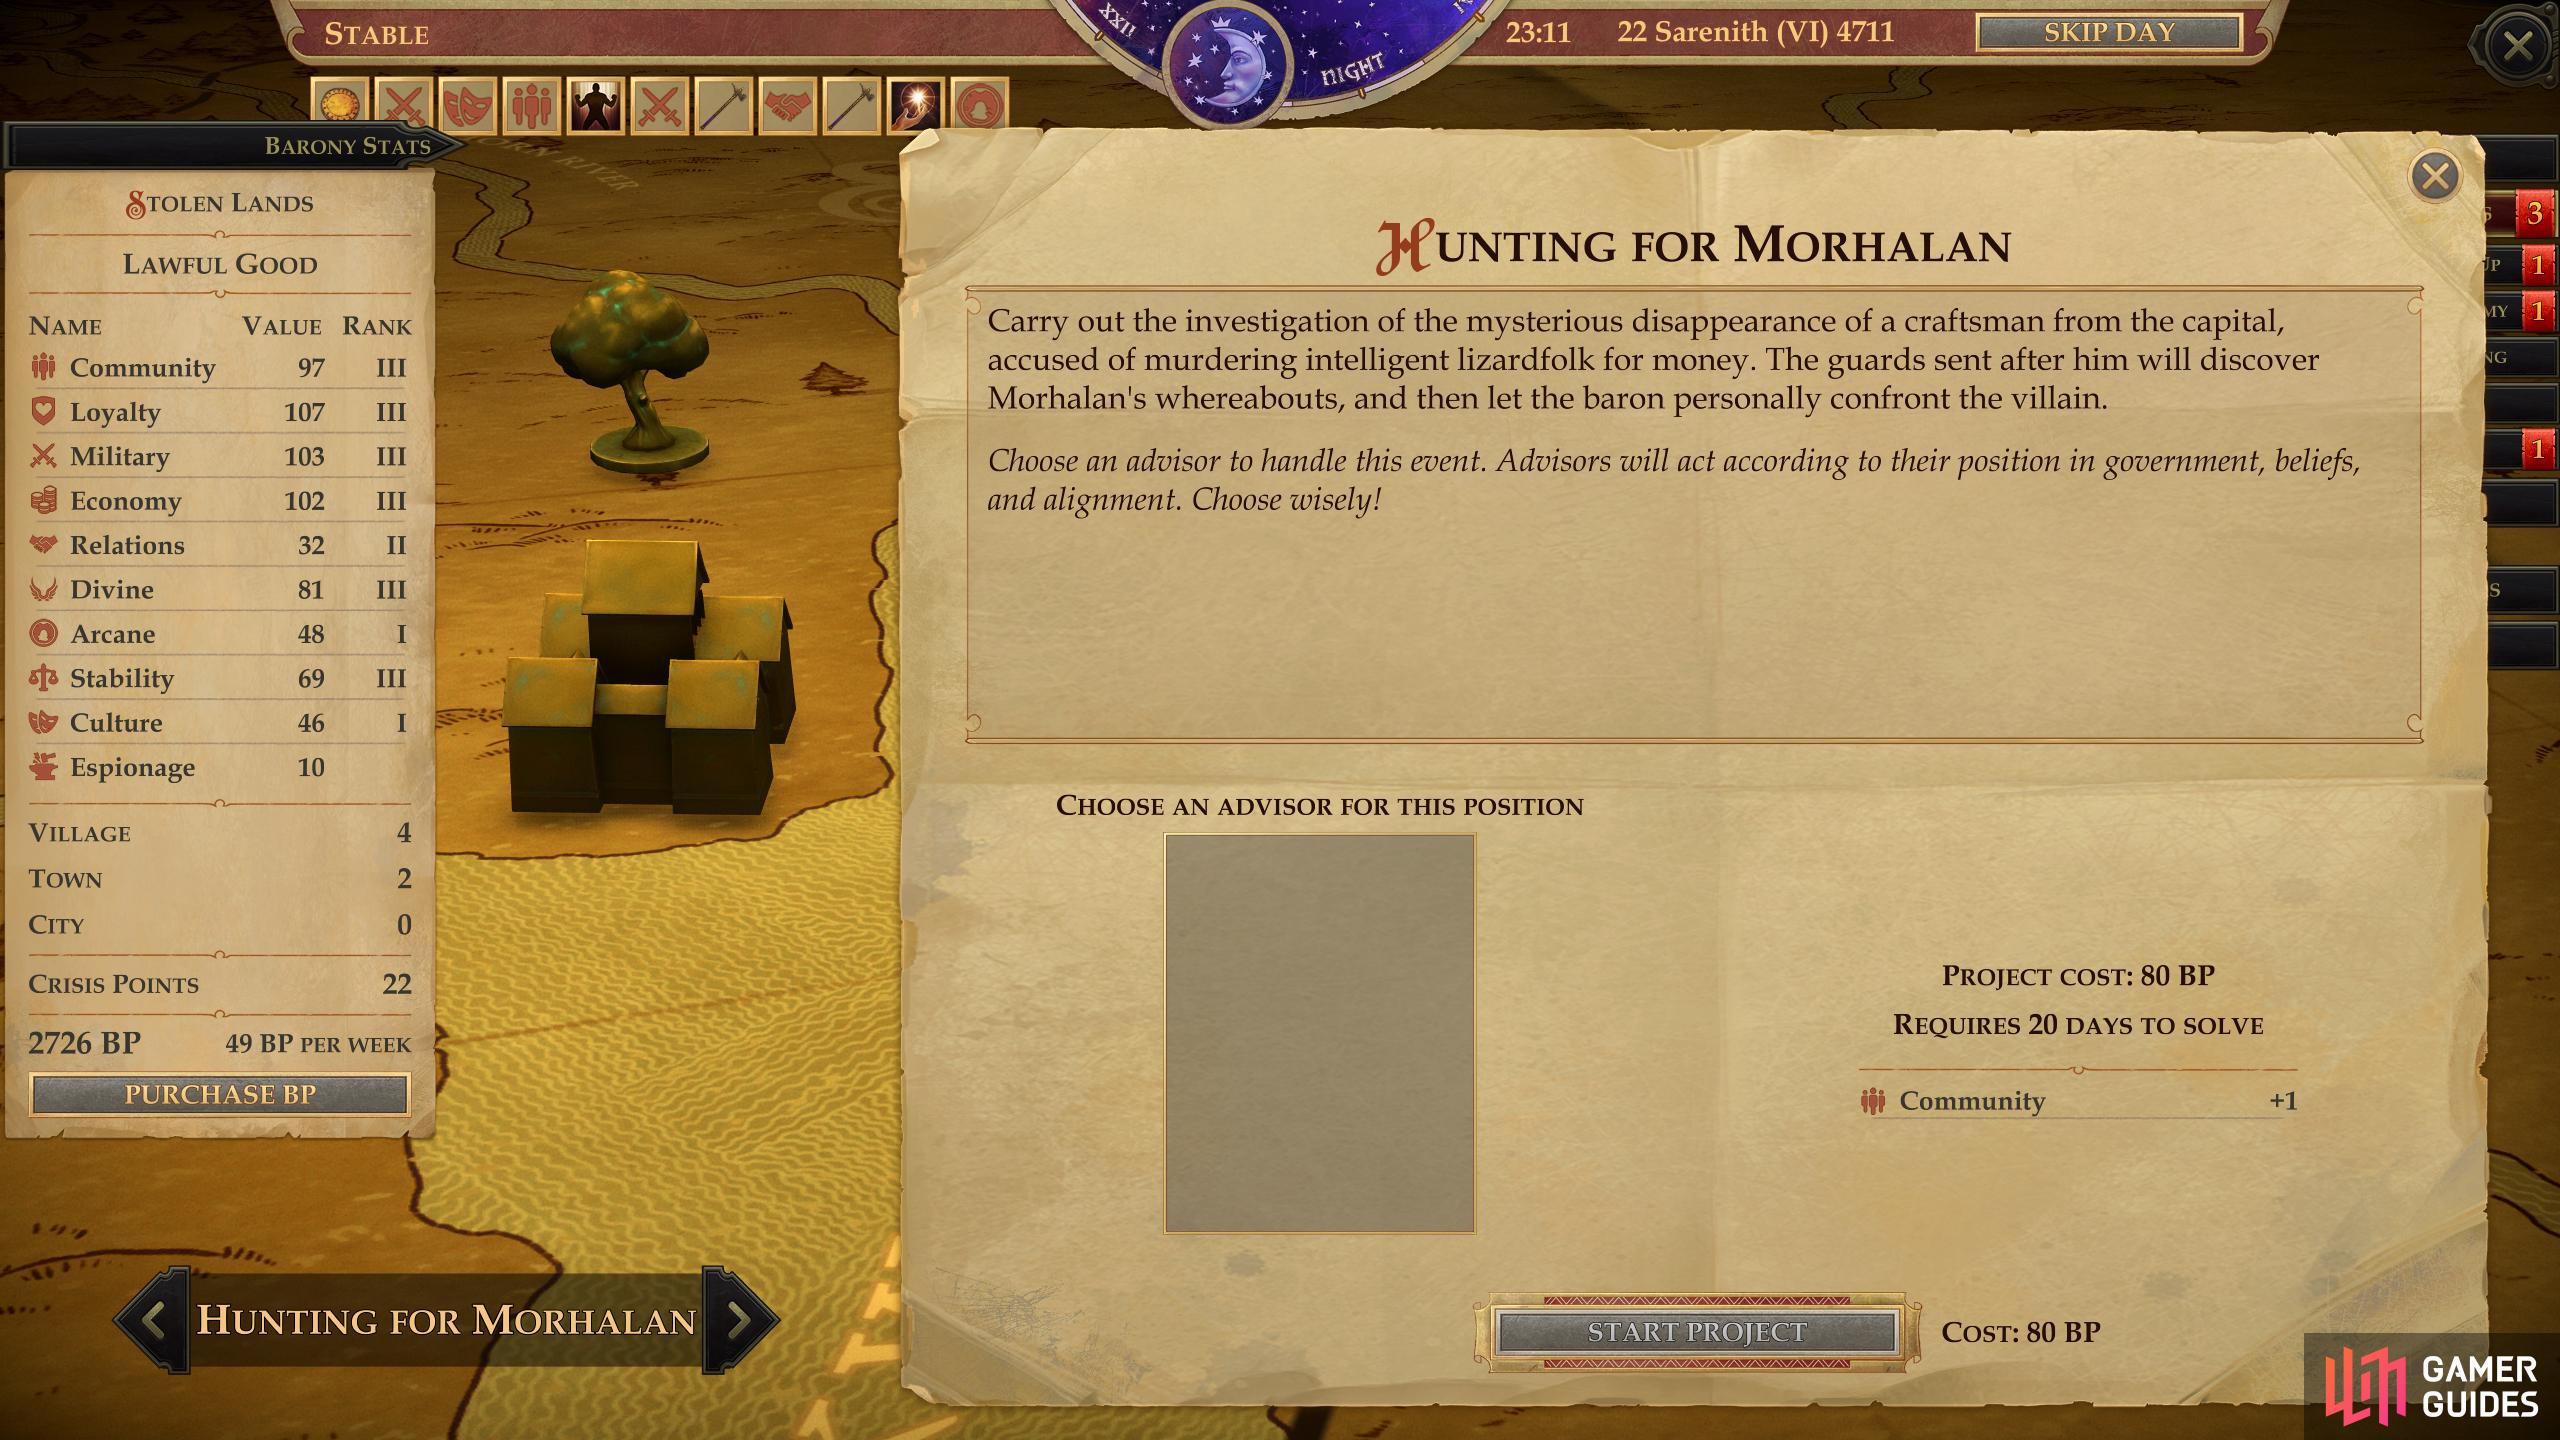 Morhalan is able to escape justice, forcing you to hunt him down via the "Hunting for Morhalan" project.